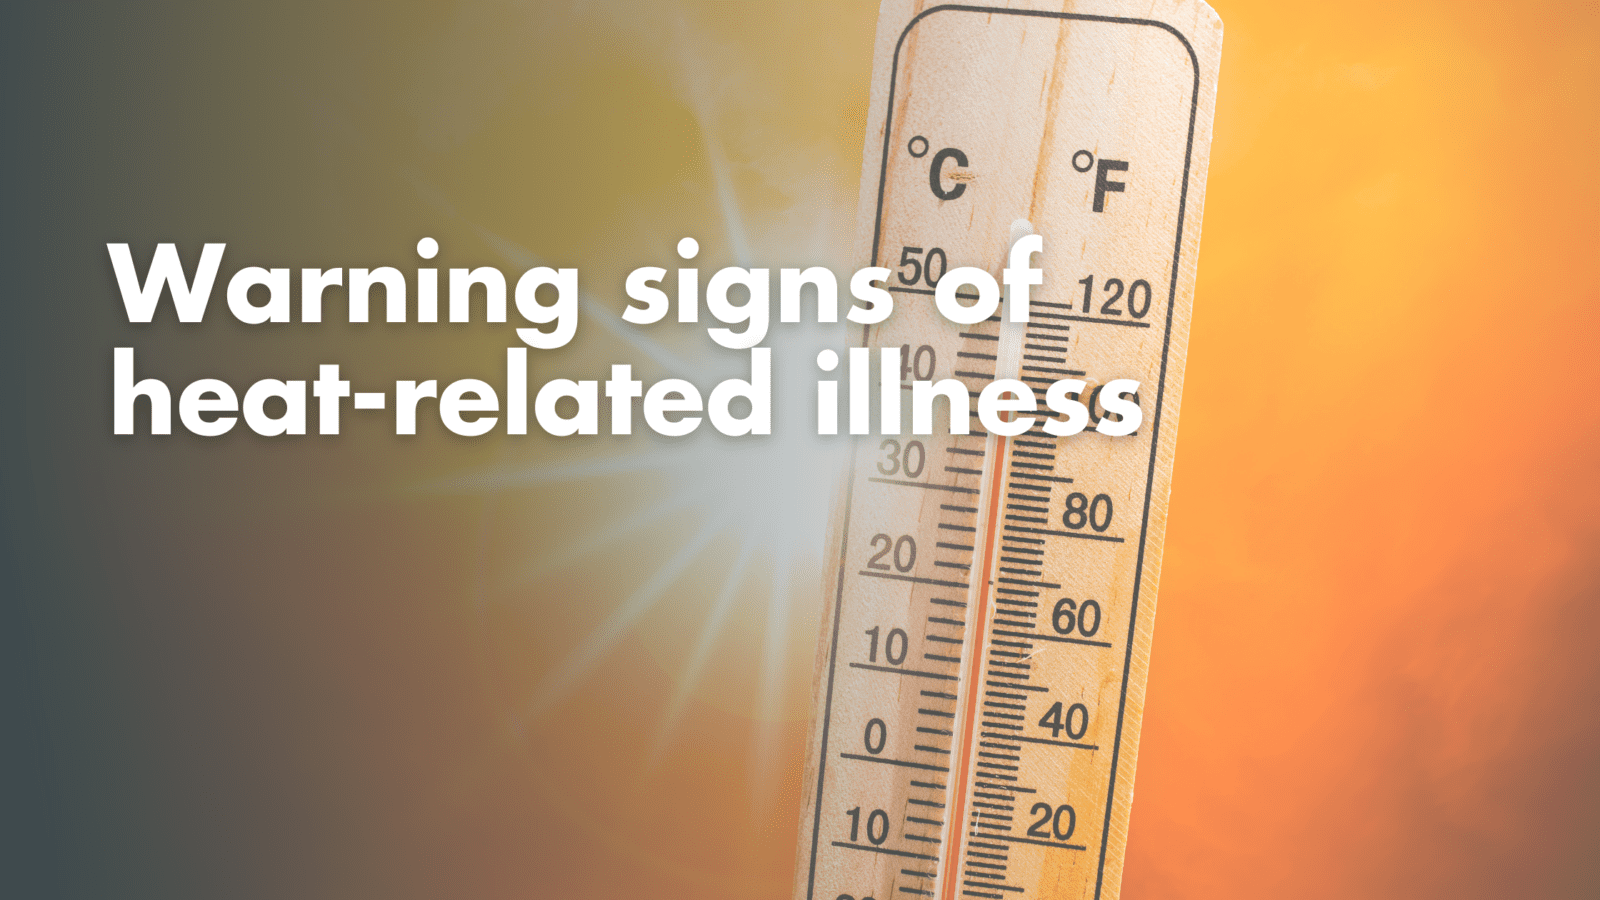 Know the warning signs of heat-related illness